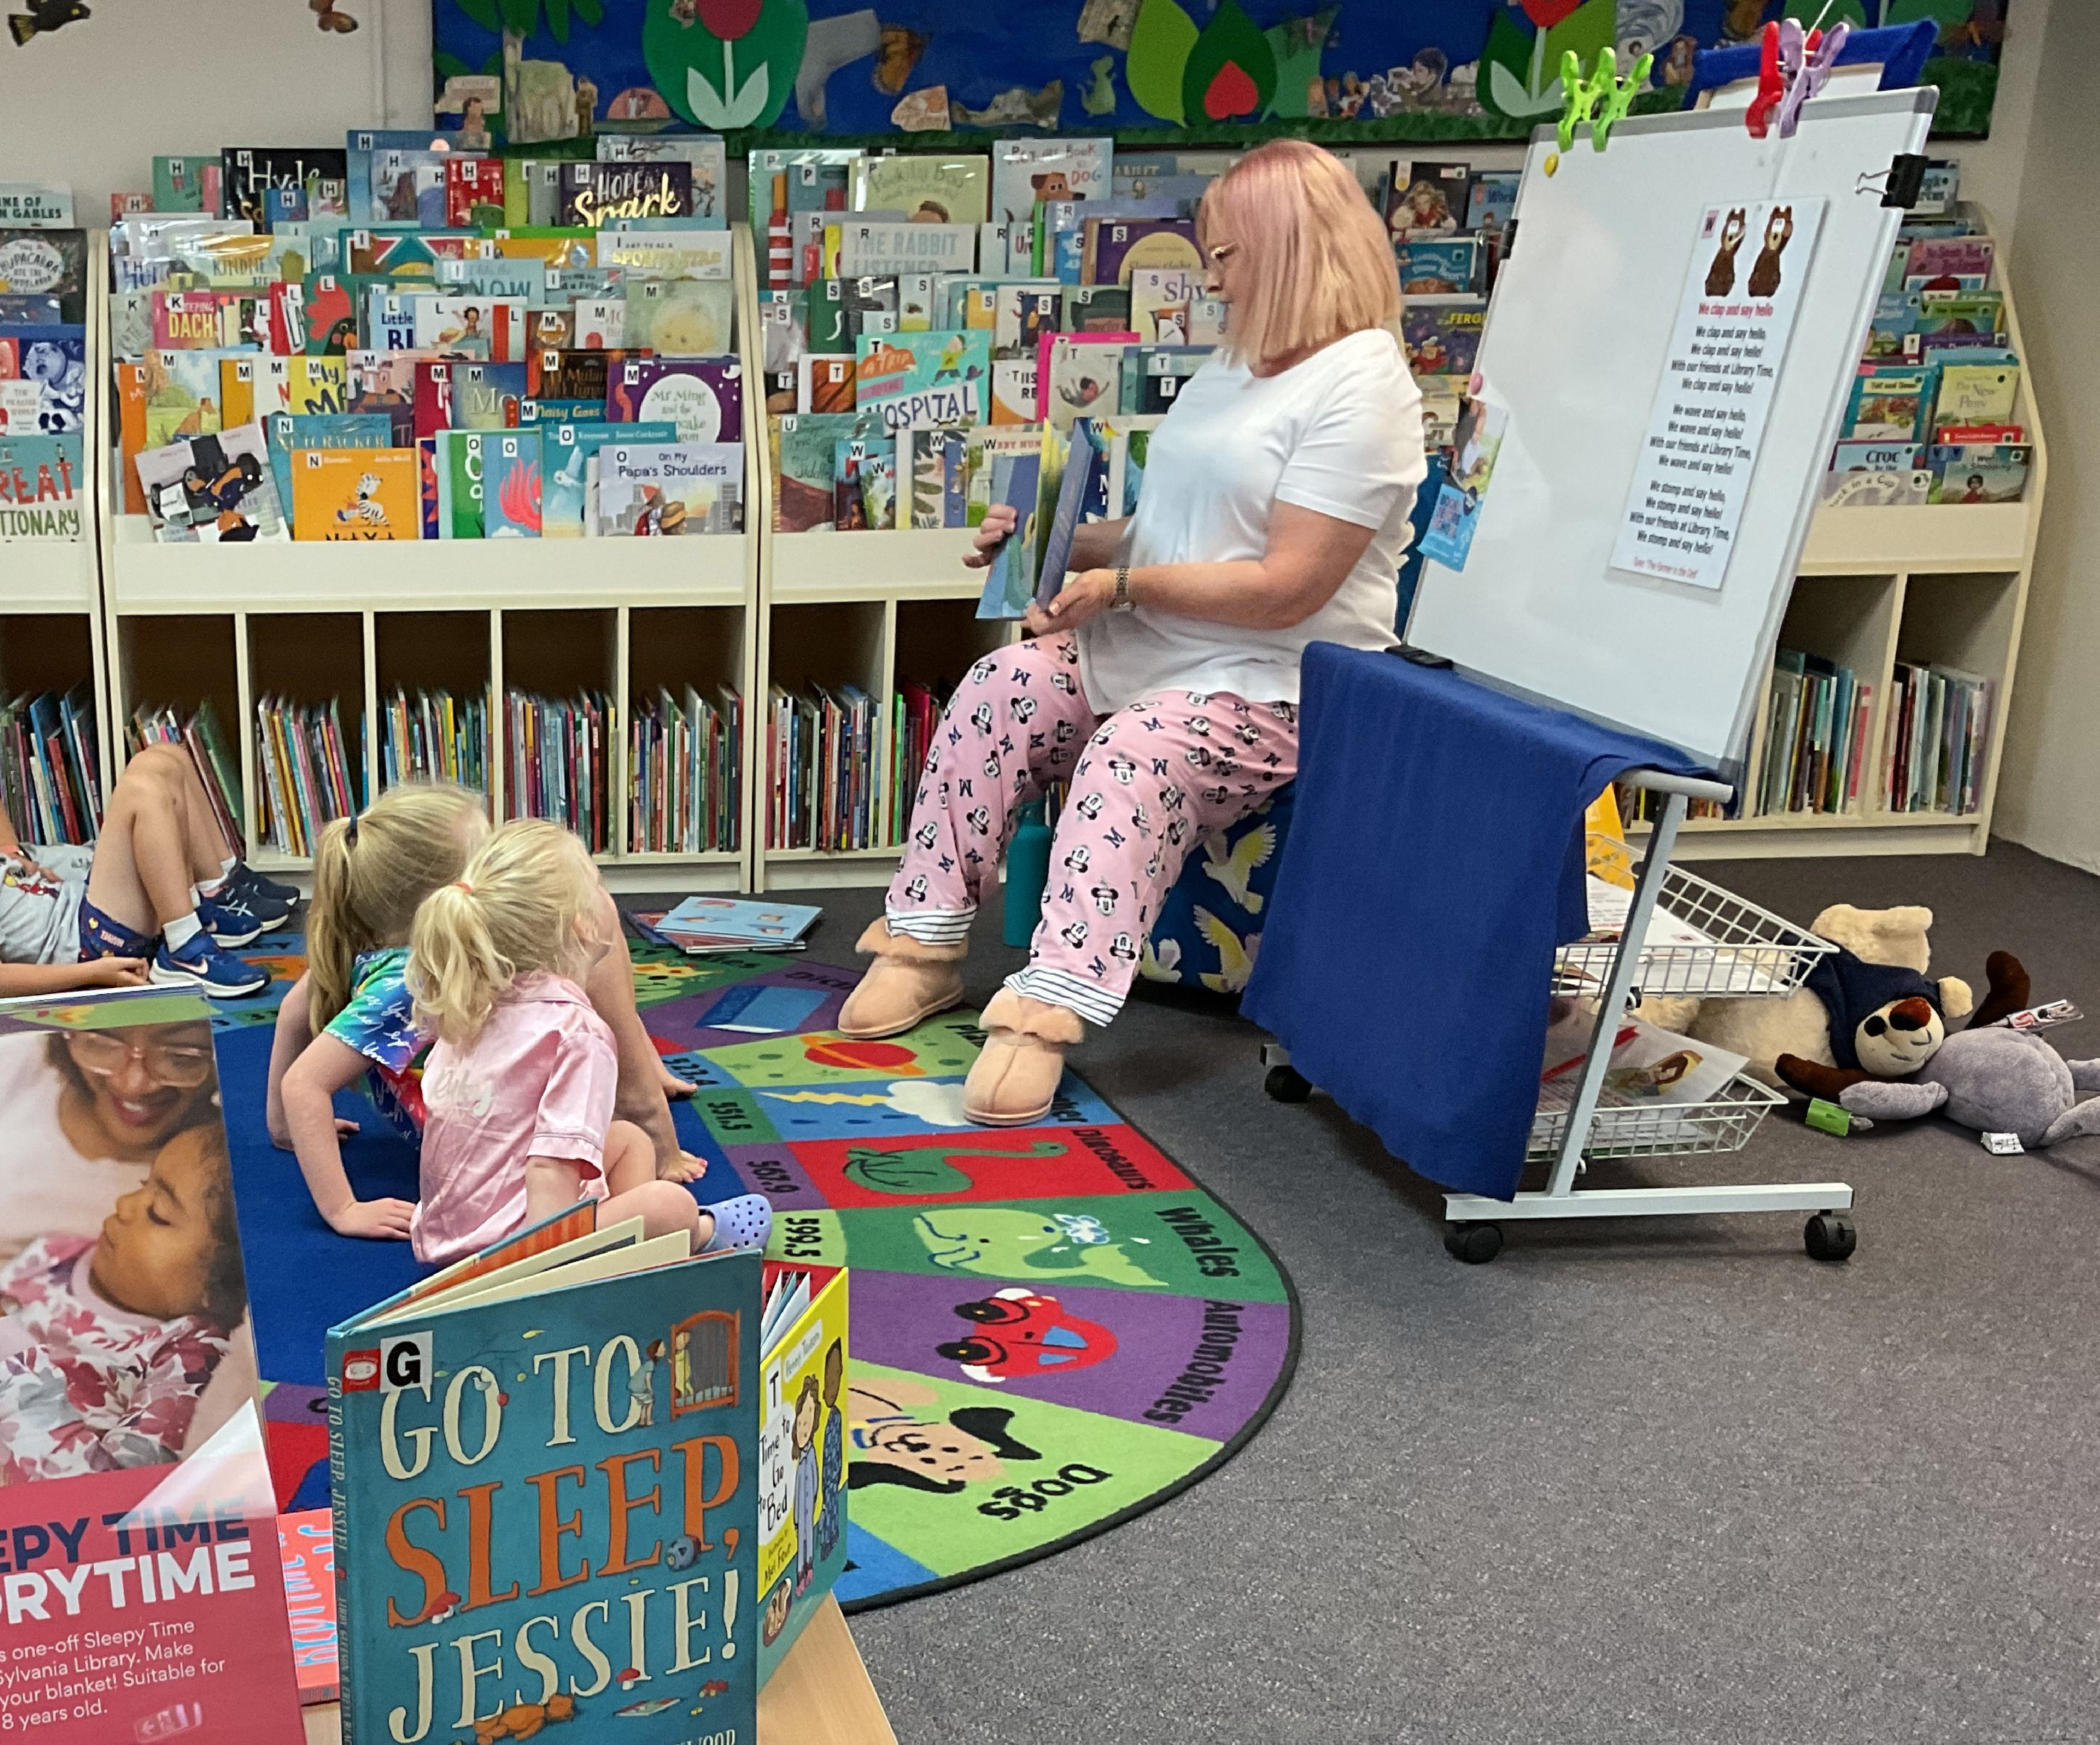 Have you ever wanted to wear your pyjamas to the library? We’re welcoming you and your little one to do just that for a special Sleepy Storytime. Find out more.